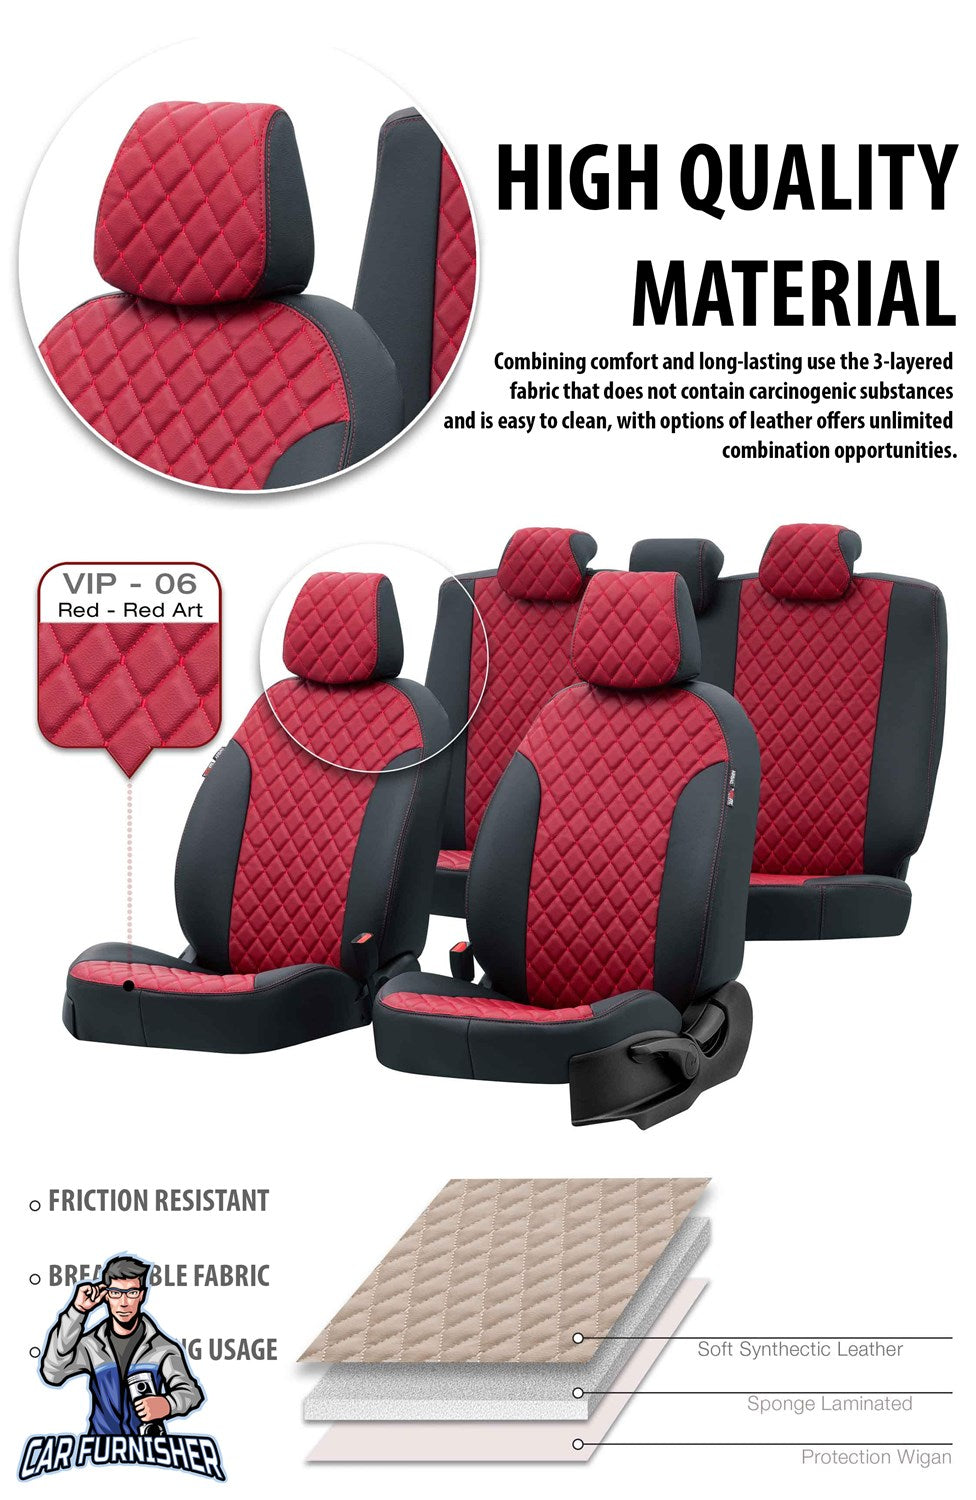 Isuzu N35 Seat Cover Madrid Leather Design Red Leather